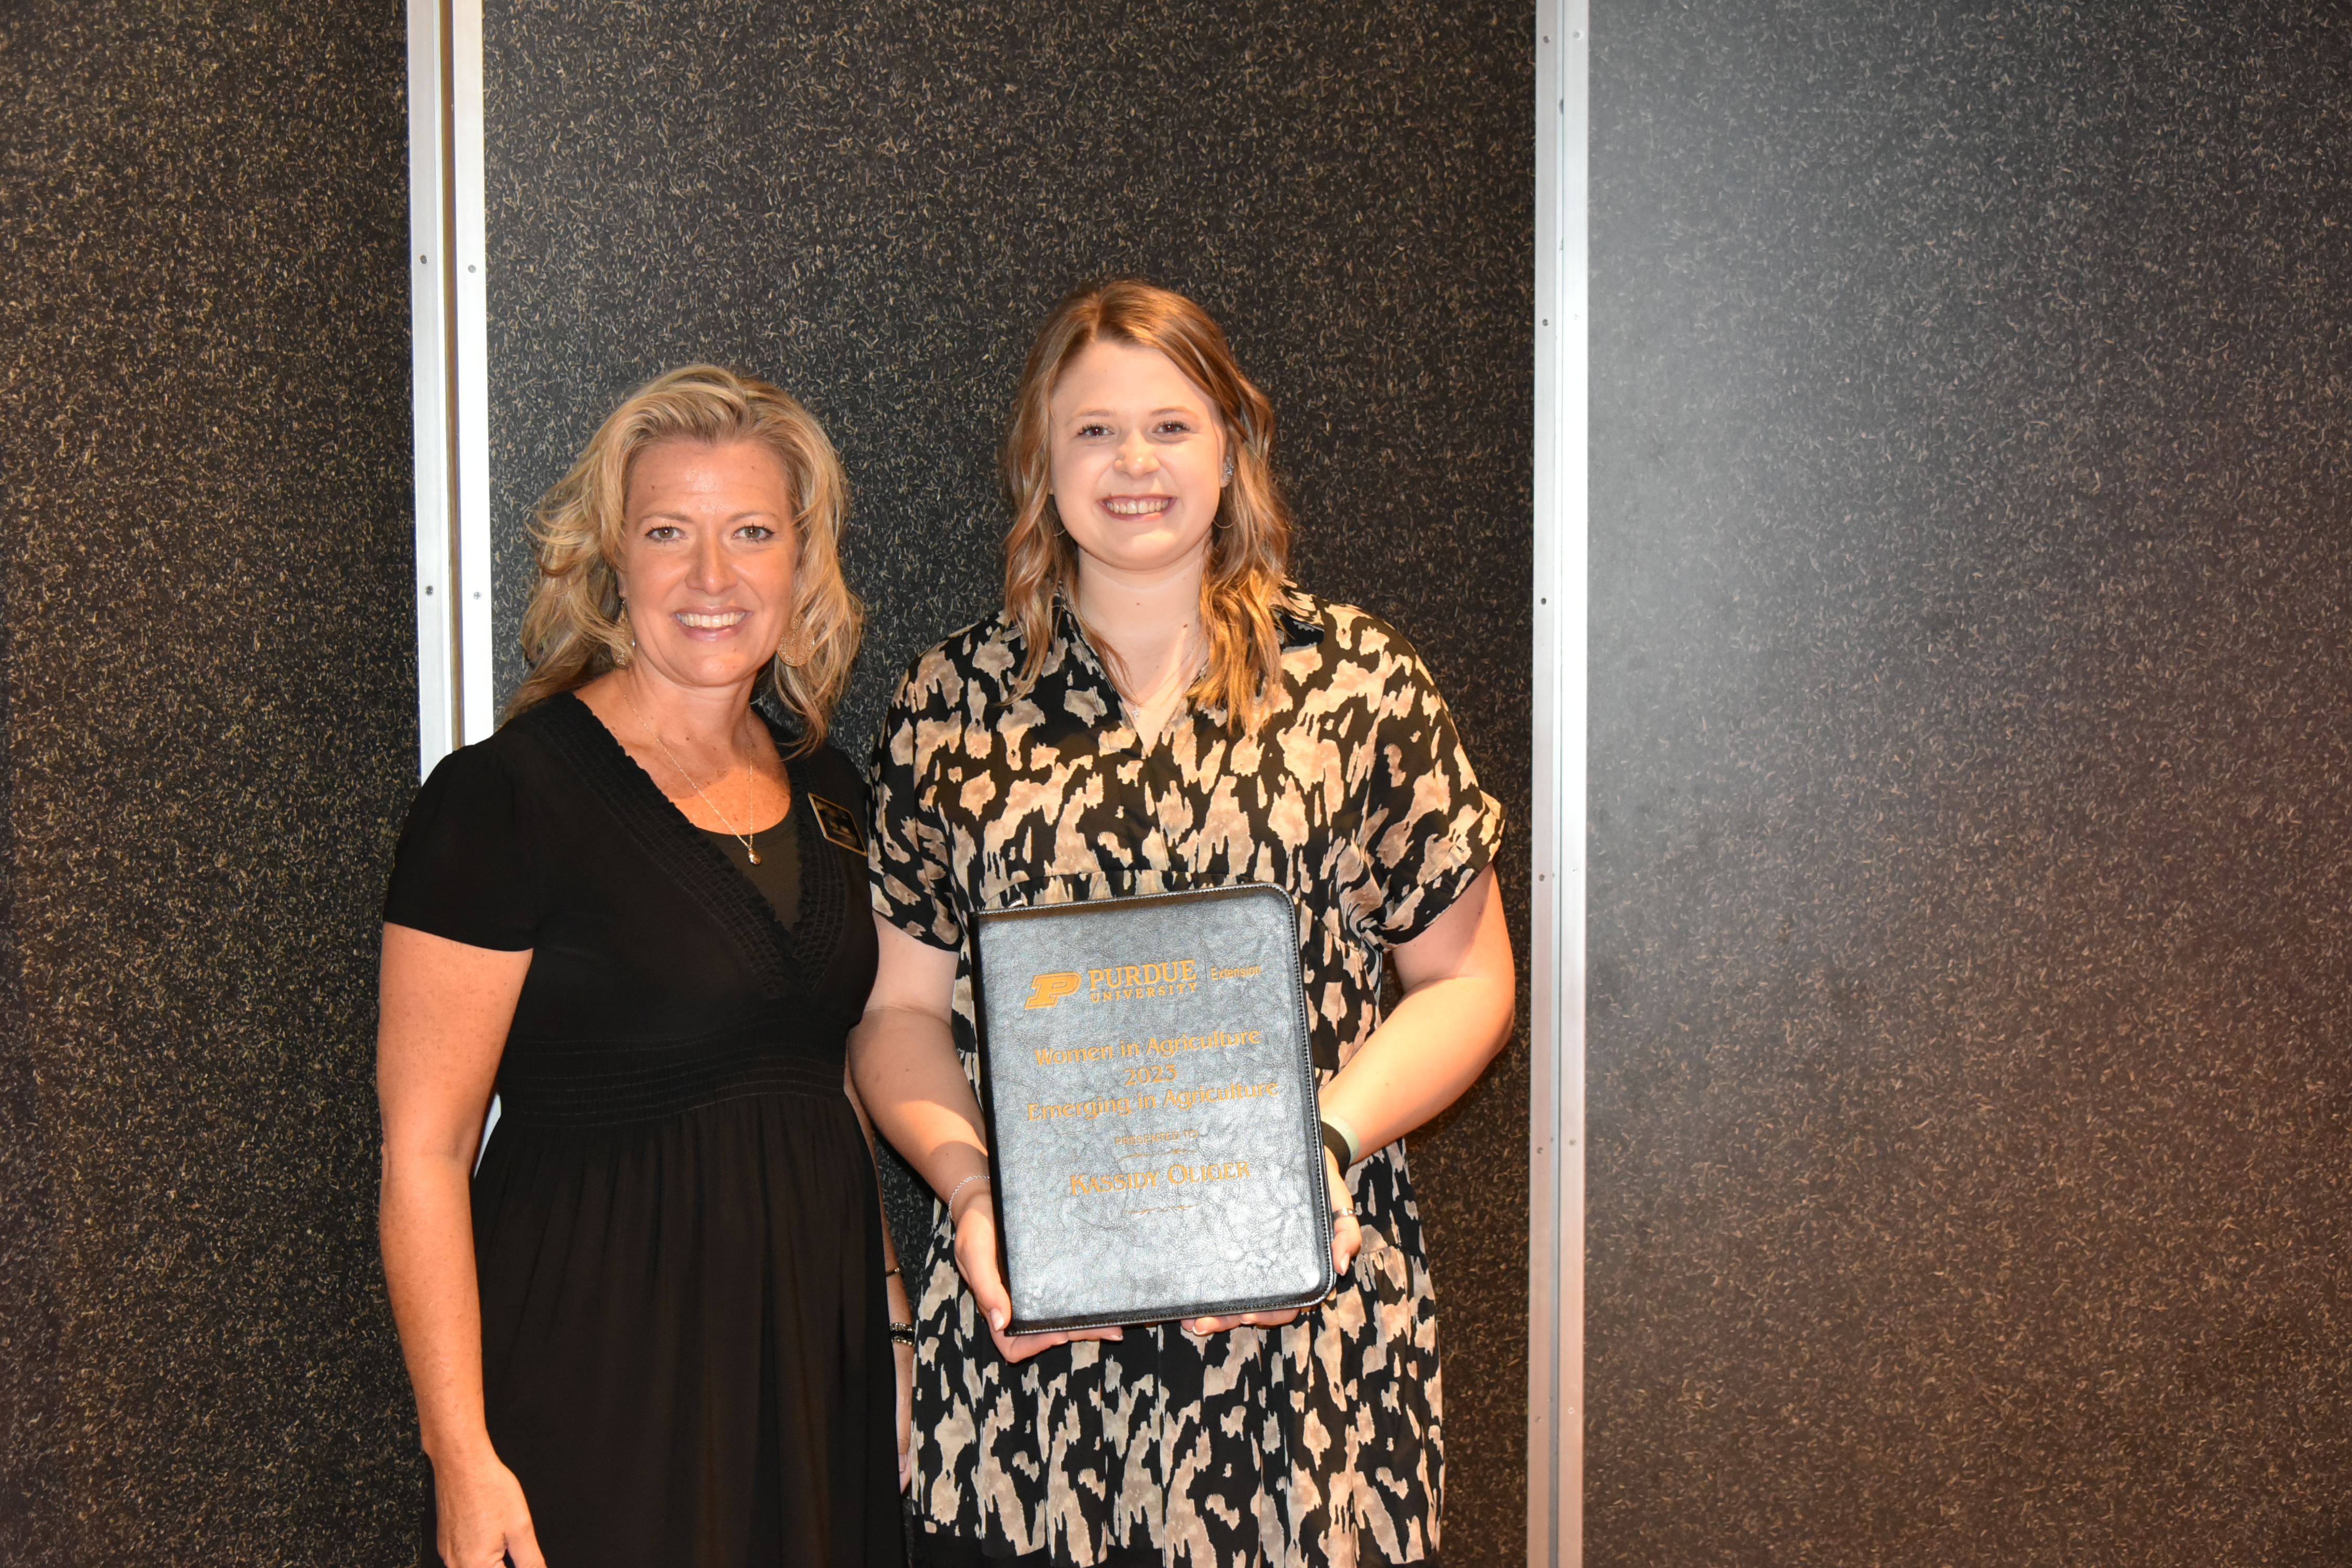 Kassidy Oliger received the 2023 Emerging Women in Agriculture Leadership award